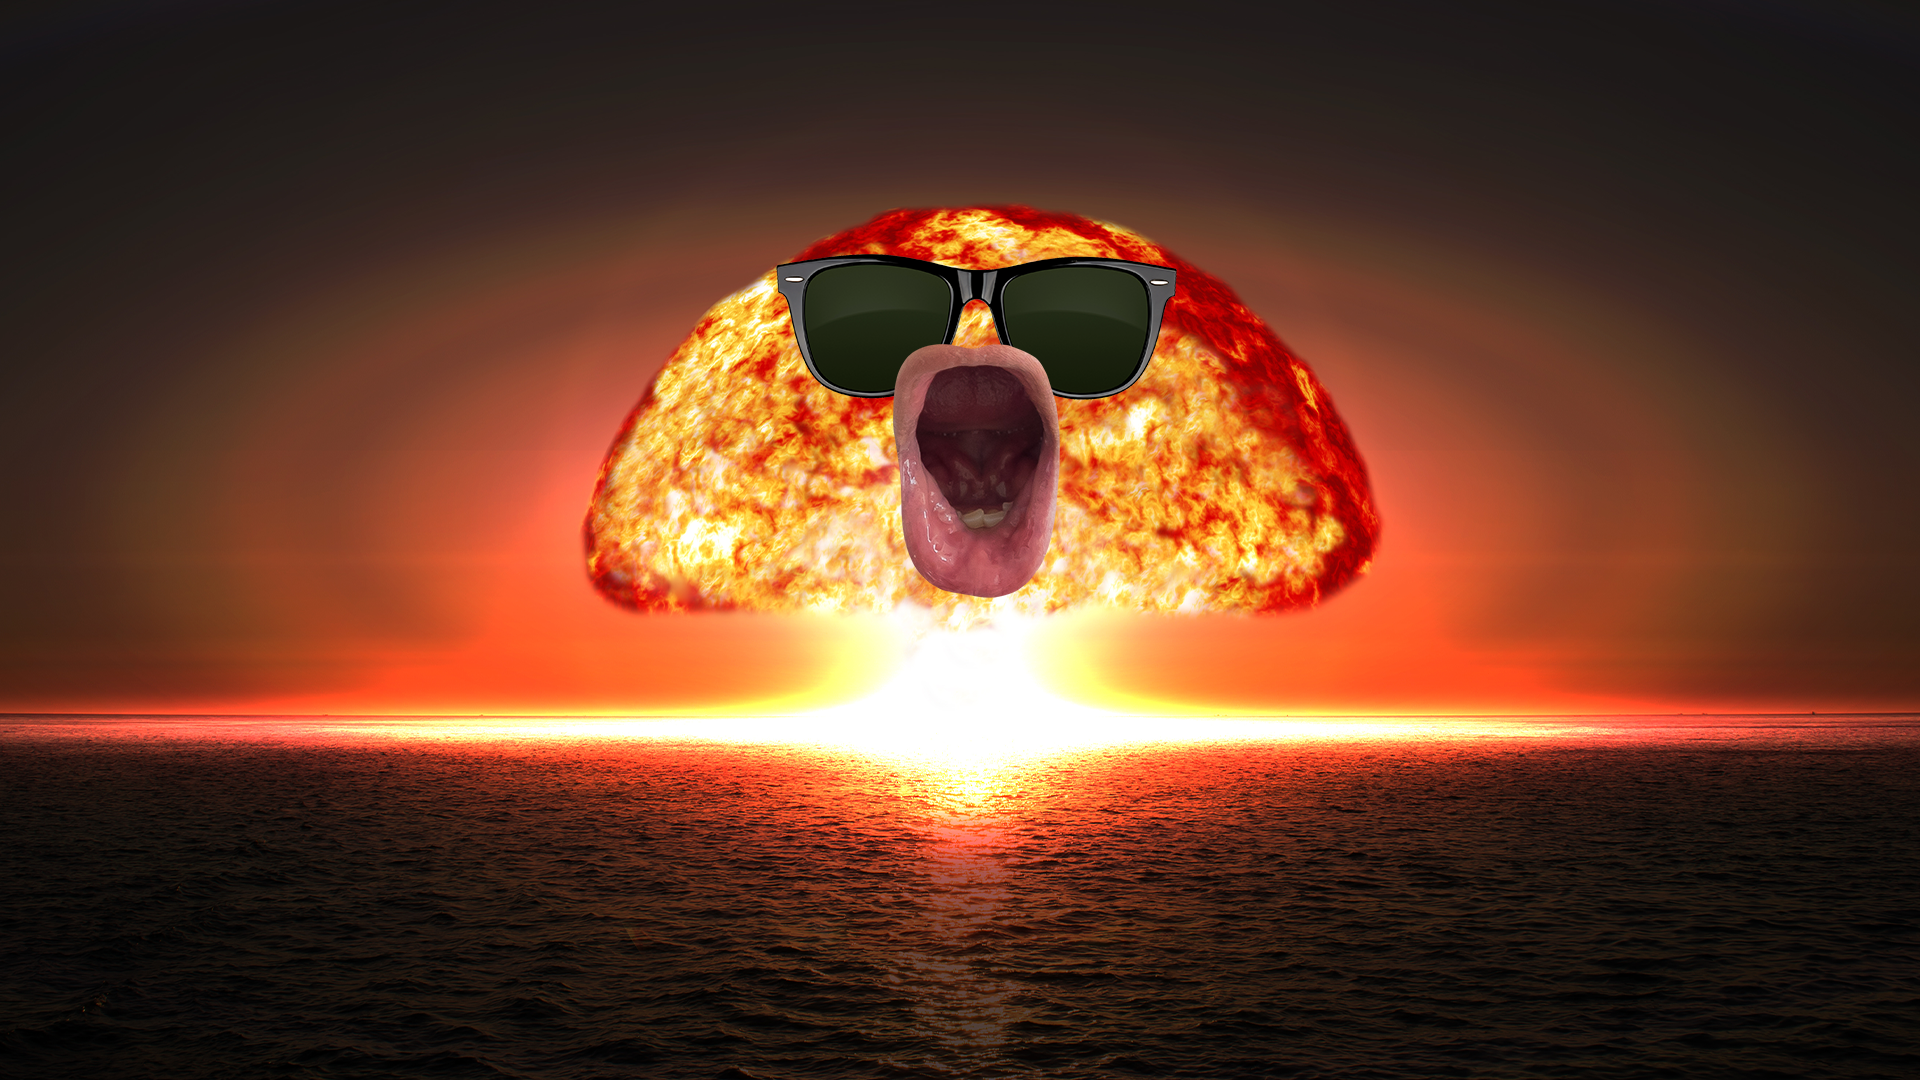 Explosion with cool face